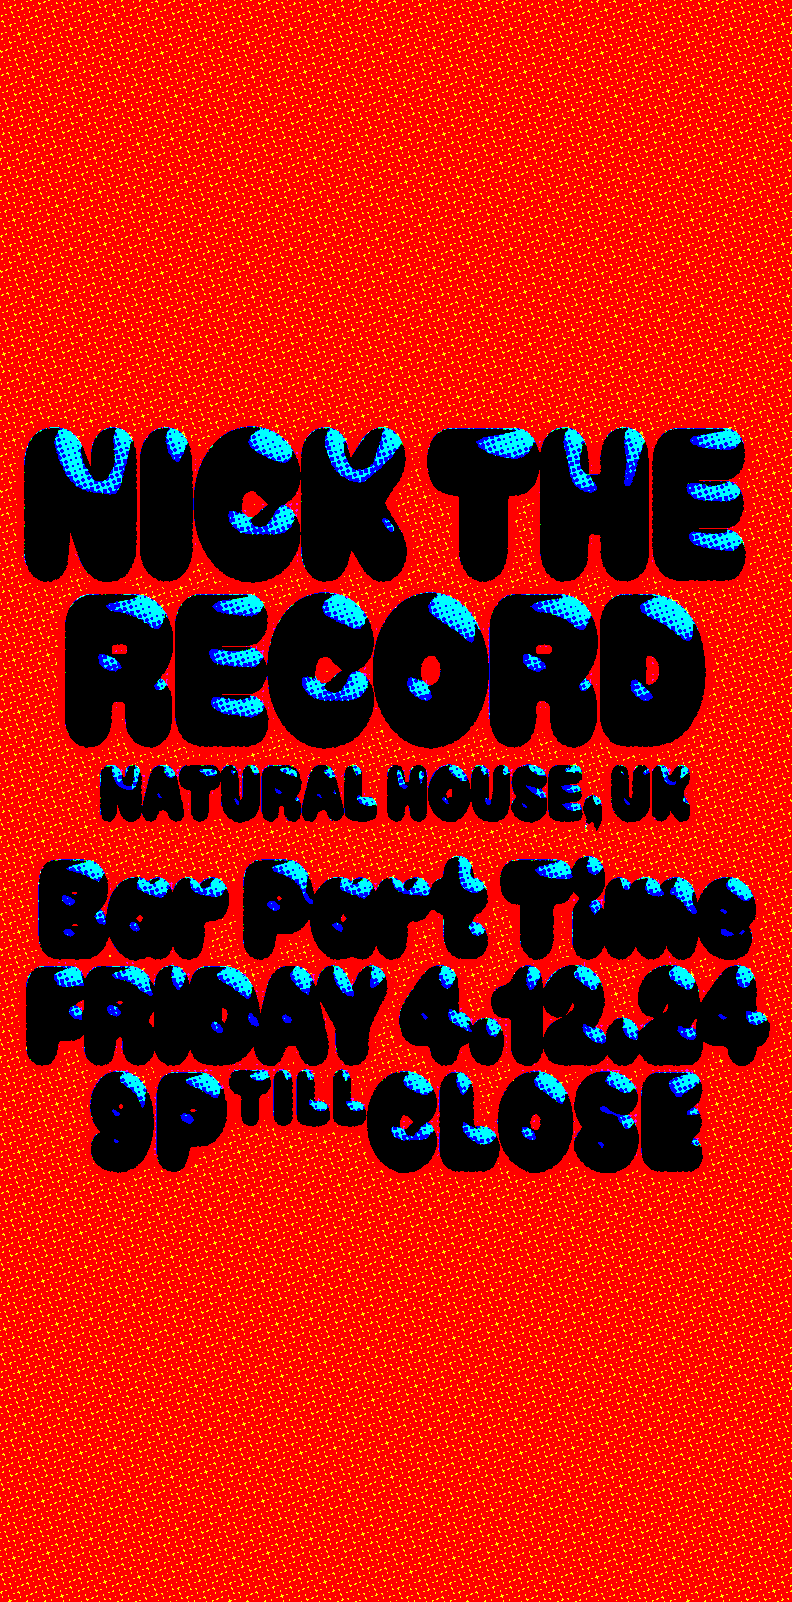 Nick The Record (Natural House, Tangent UK) at B.P.T - フライヤー表